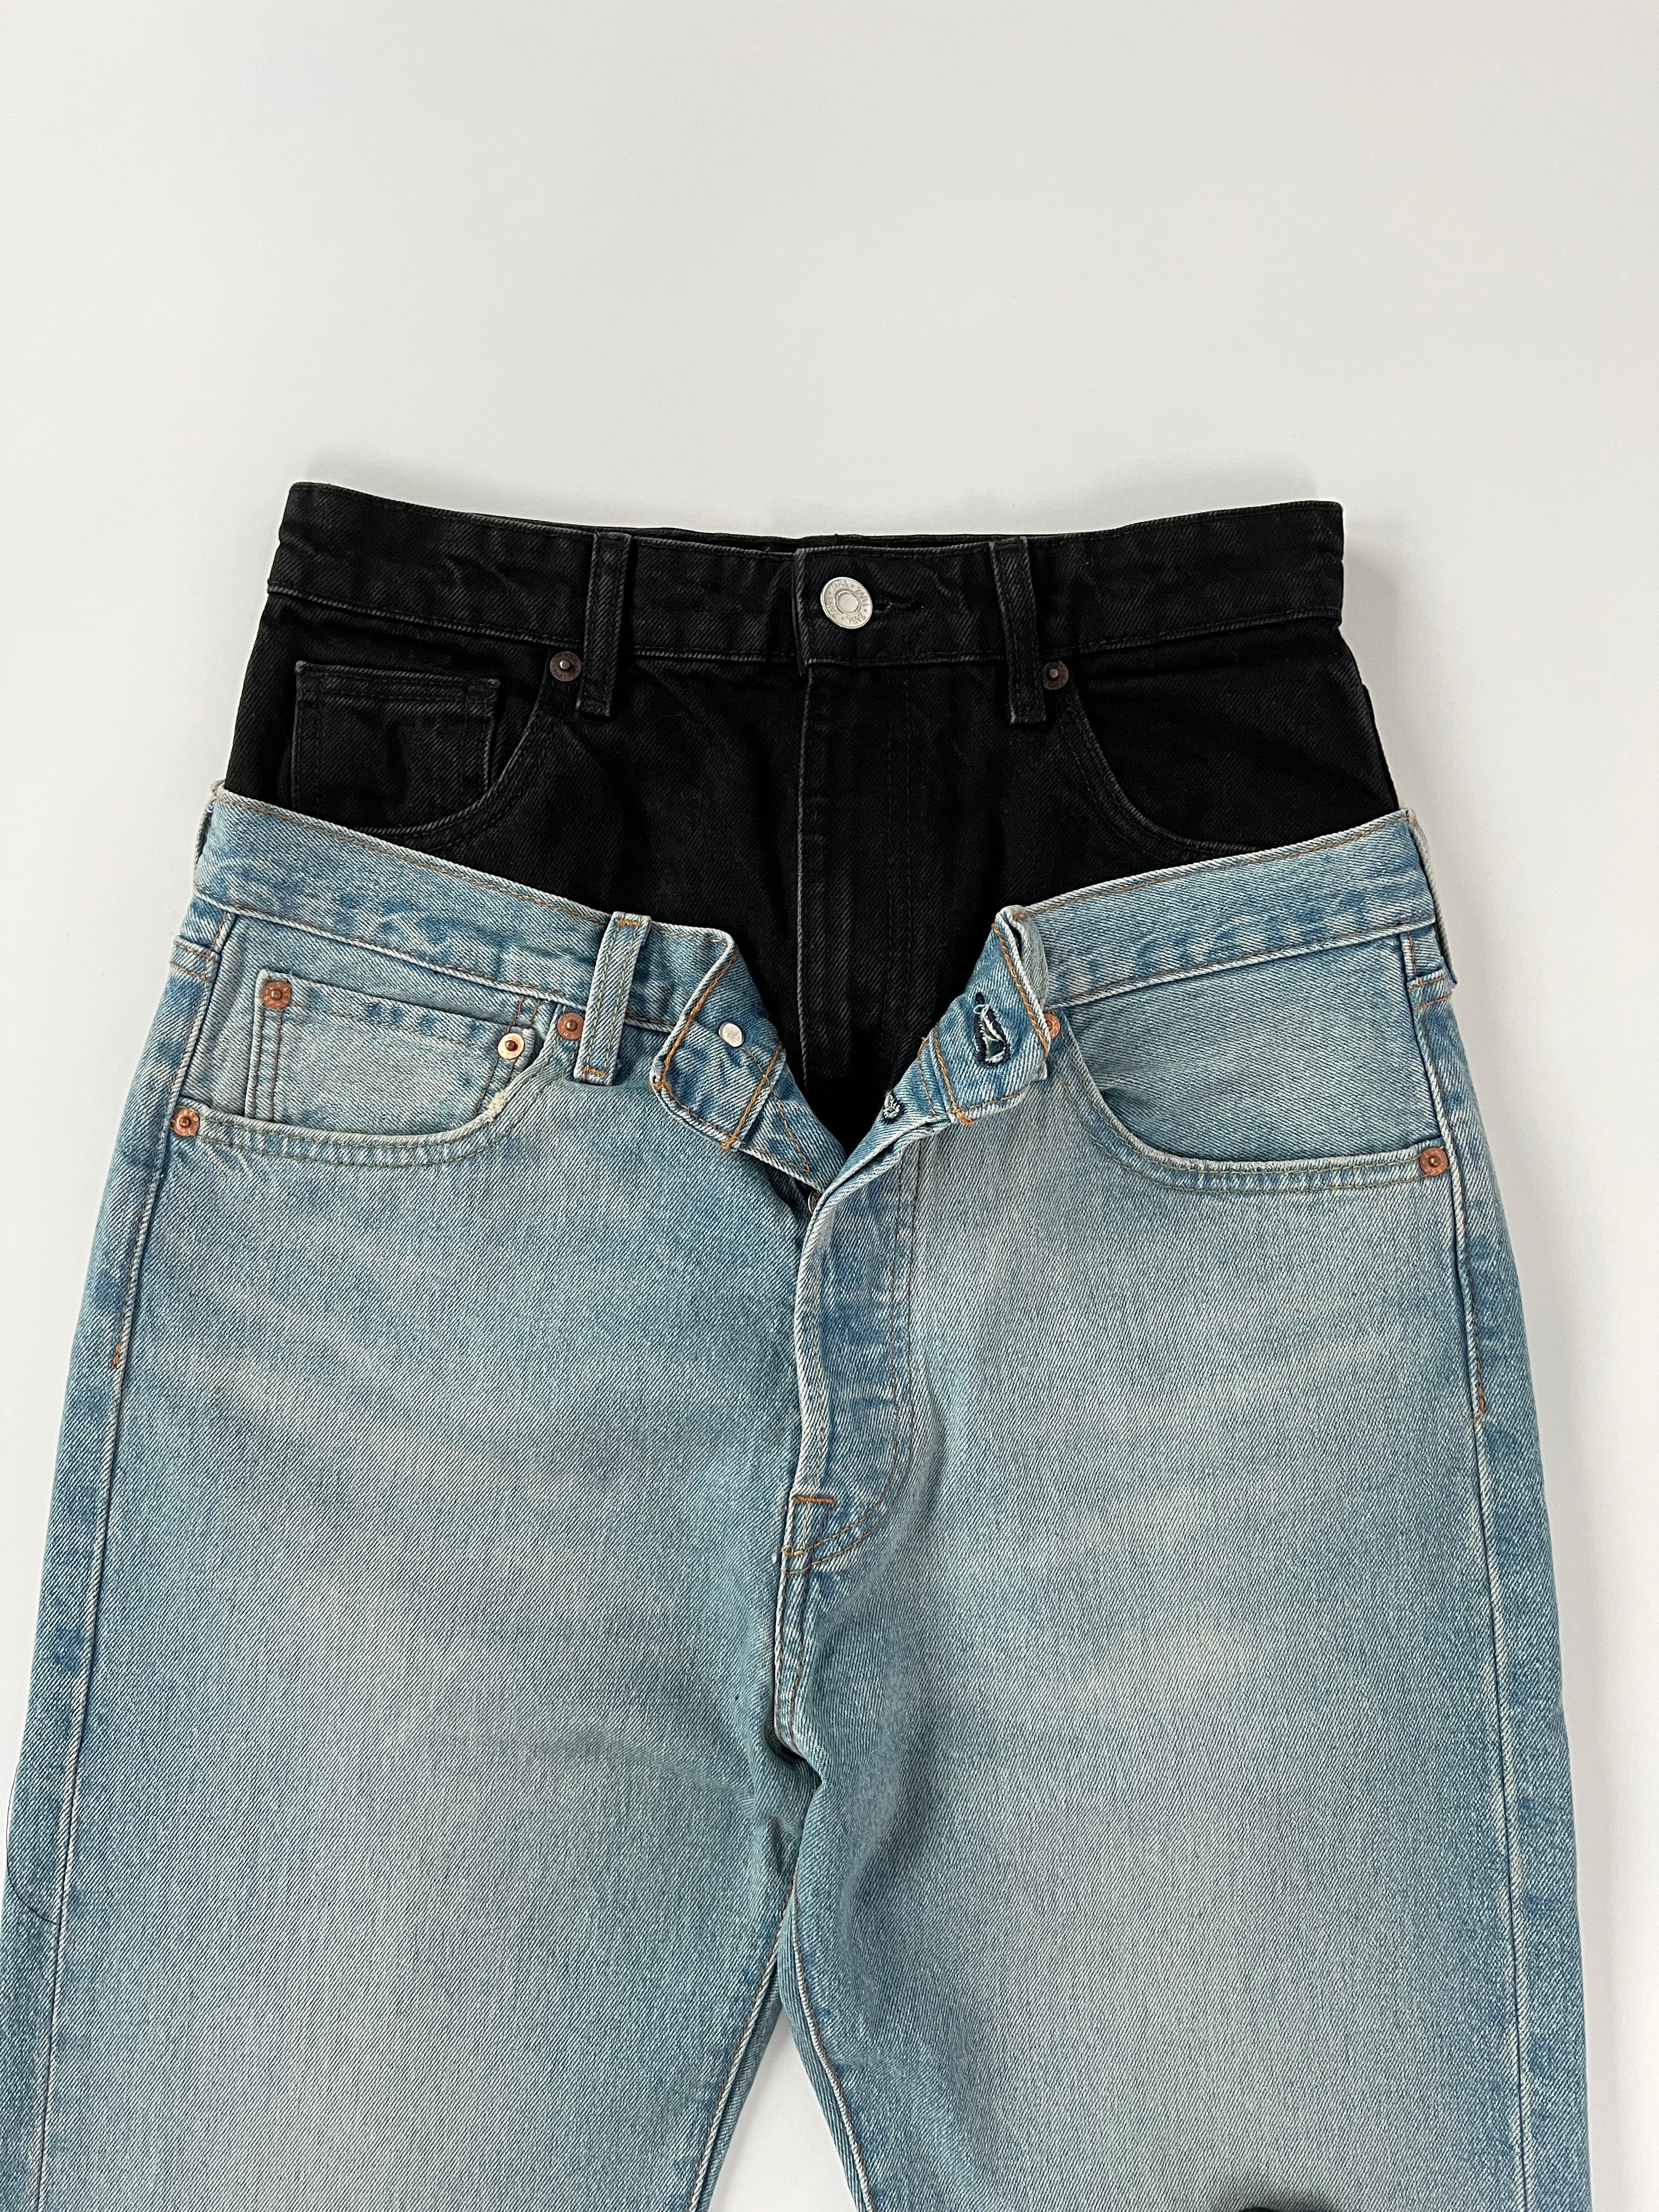 2IN1 JEANS - SIZE XS